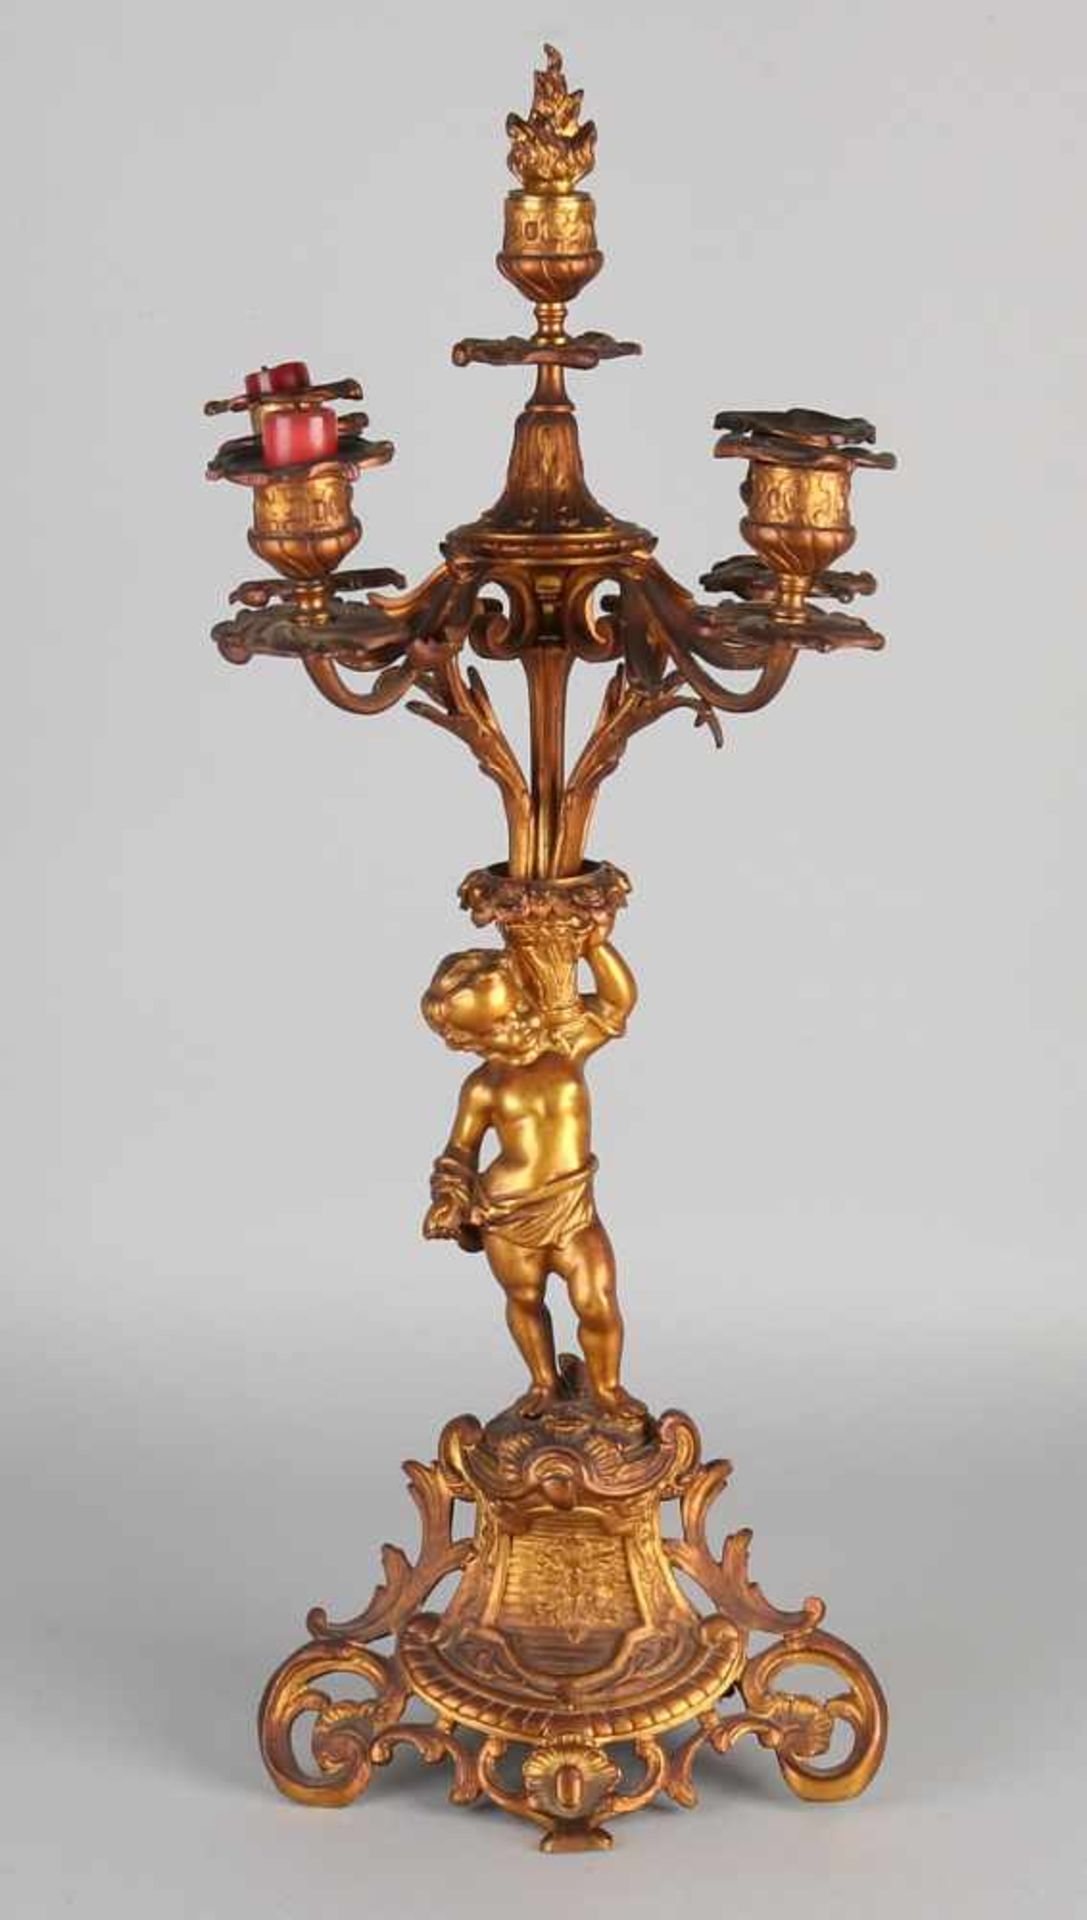 19th Century gilt bronze candle candelabra with putti. Size: H 54 cm. In good condition.